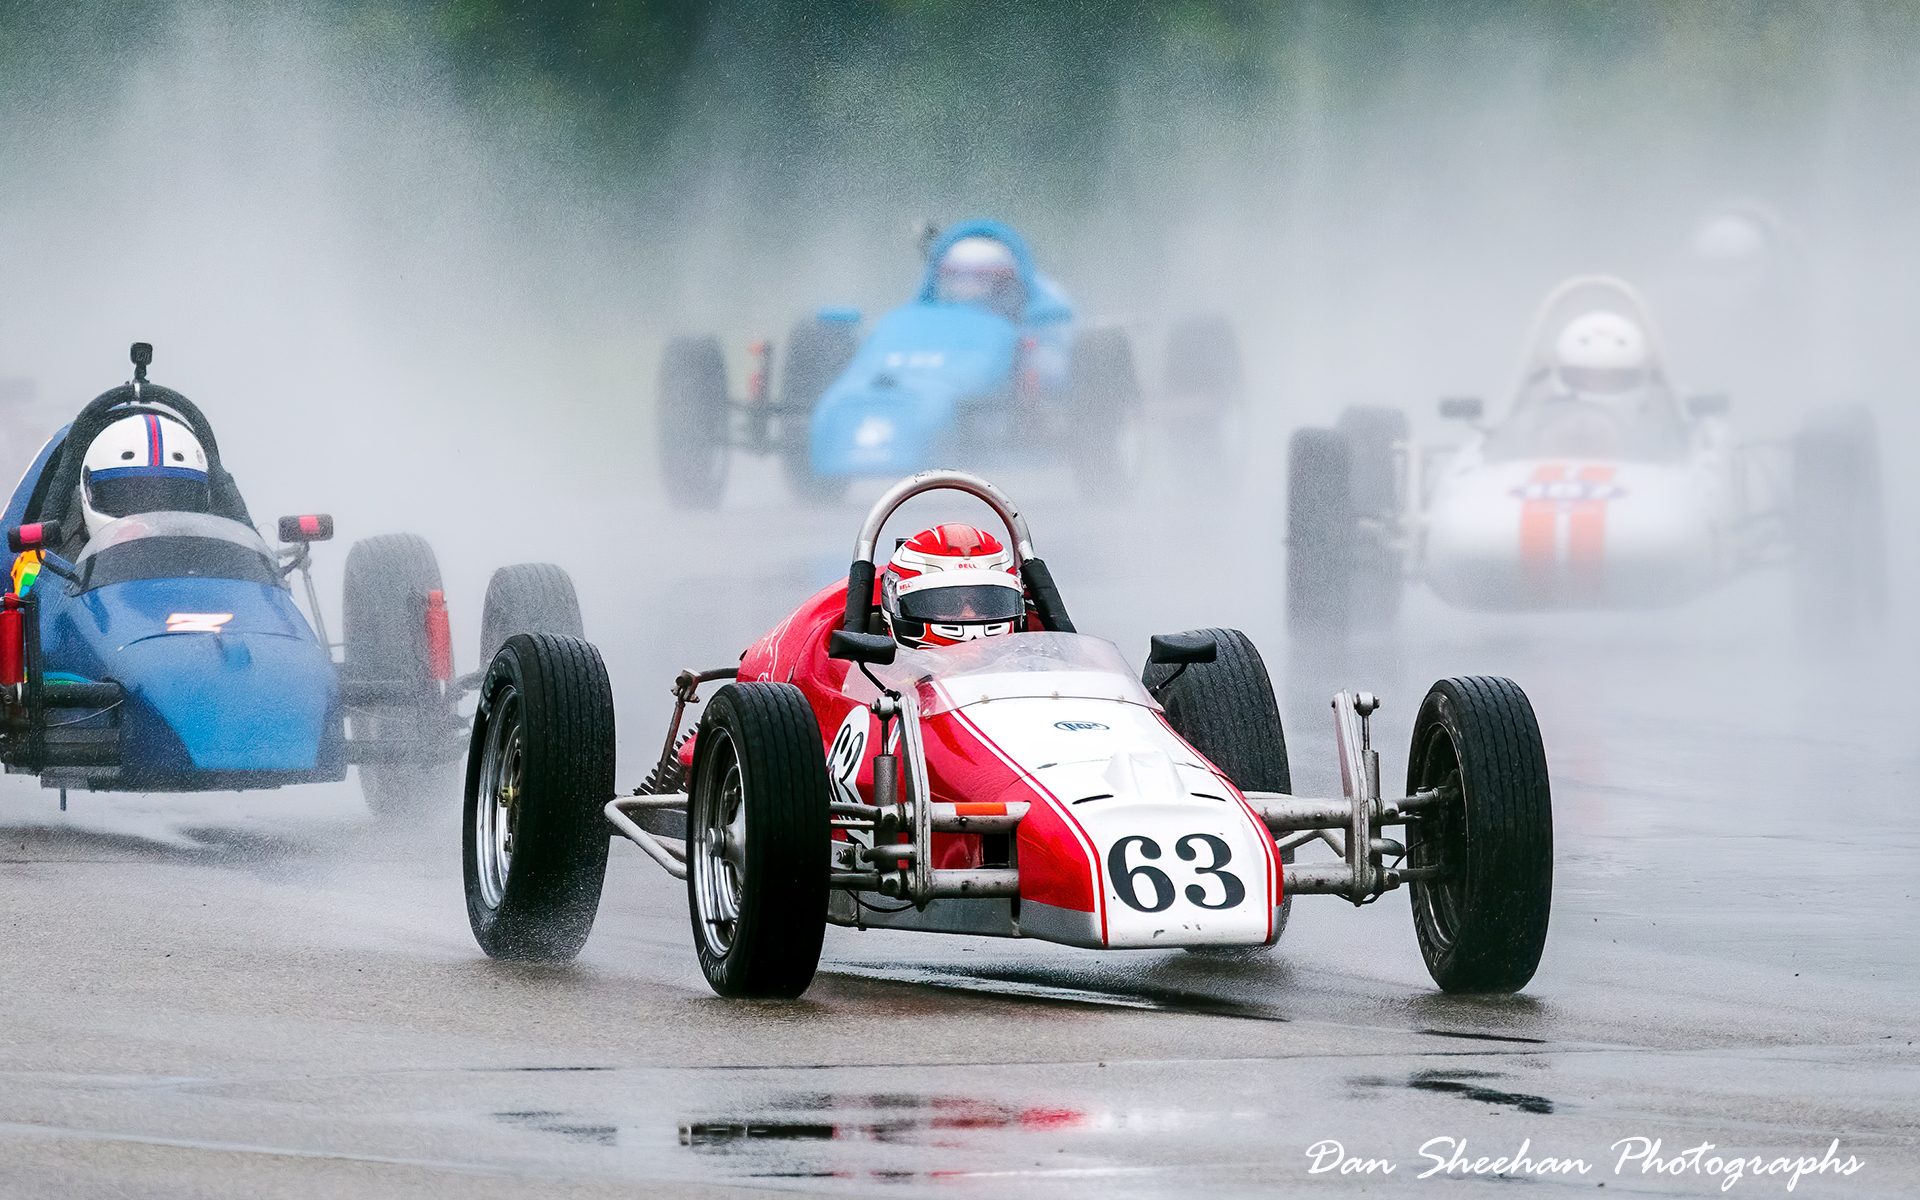 Just another day for the Formula Vee racers. : Cars : Dan Sheehan Photographs - Fine Art Stock Photography